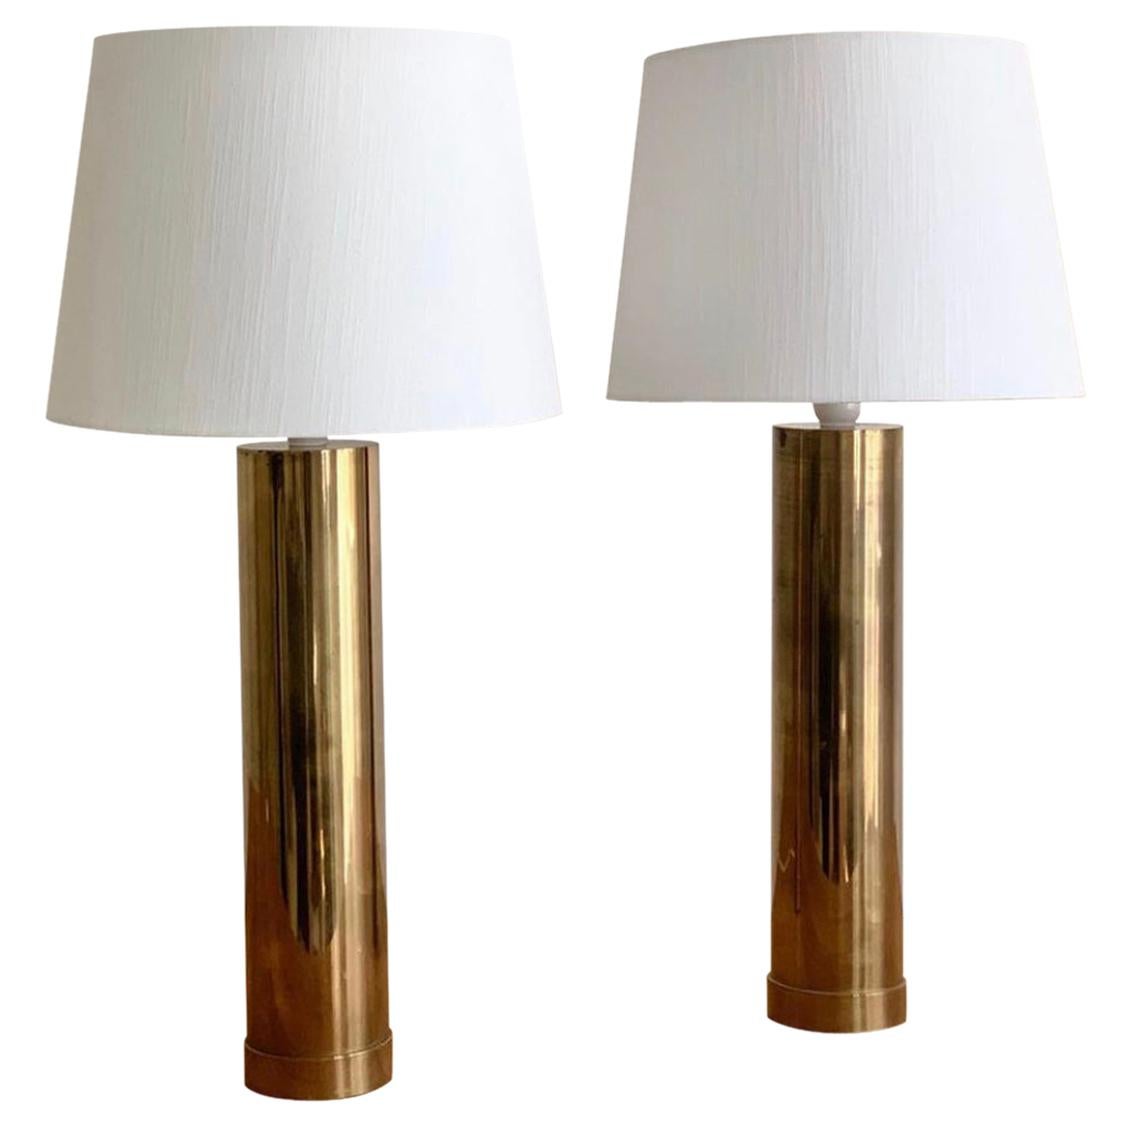 Pair of Bergboms "B-09" Table Lamps in Brass, 1960s For Sale